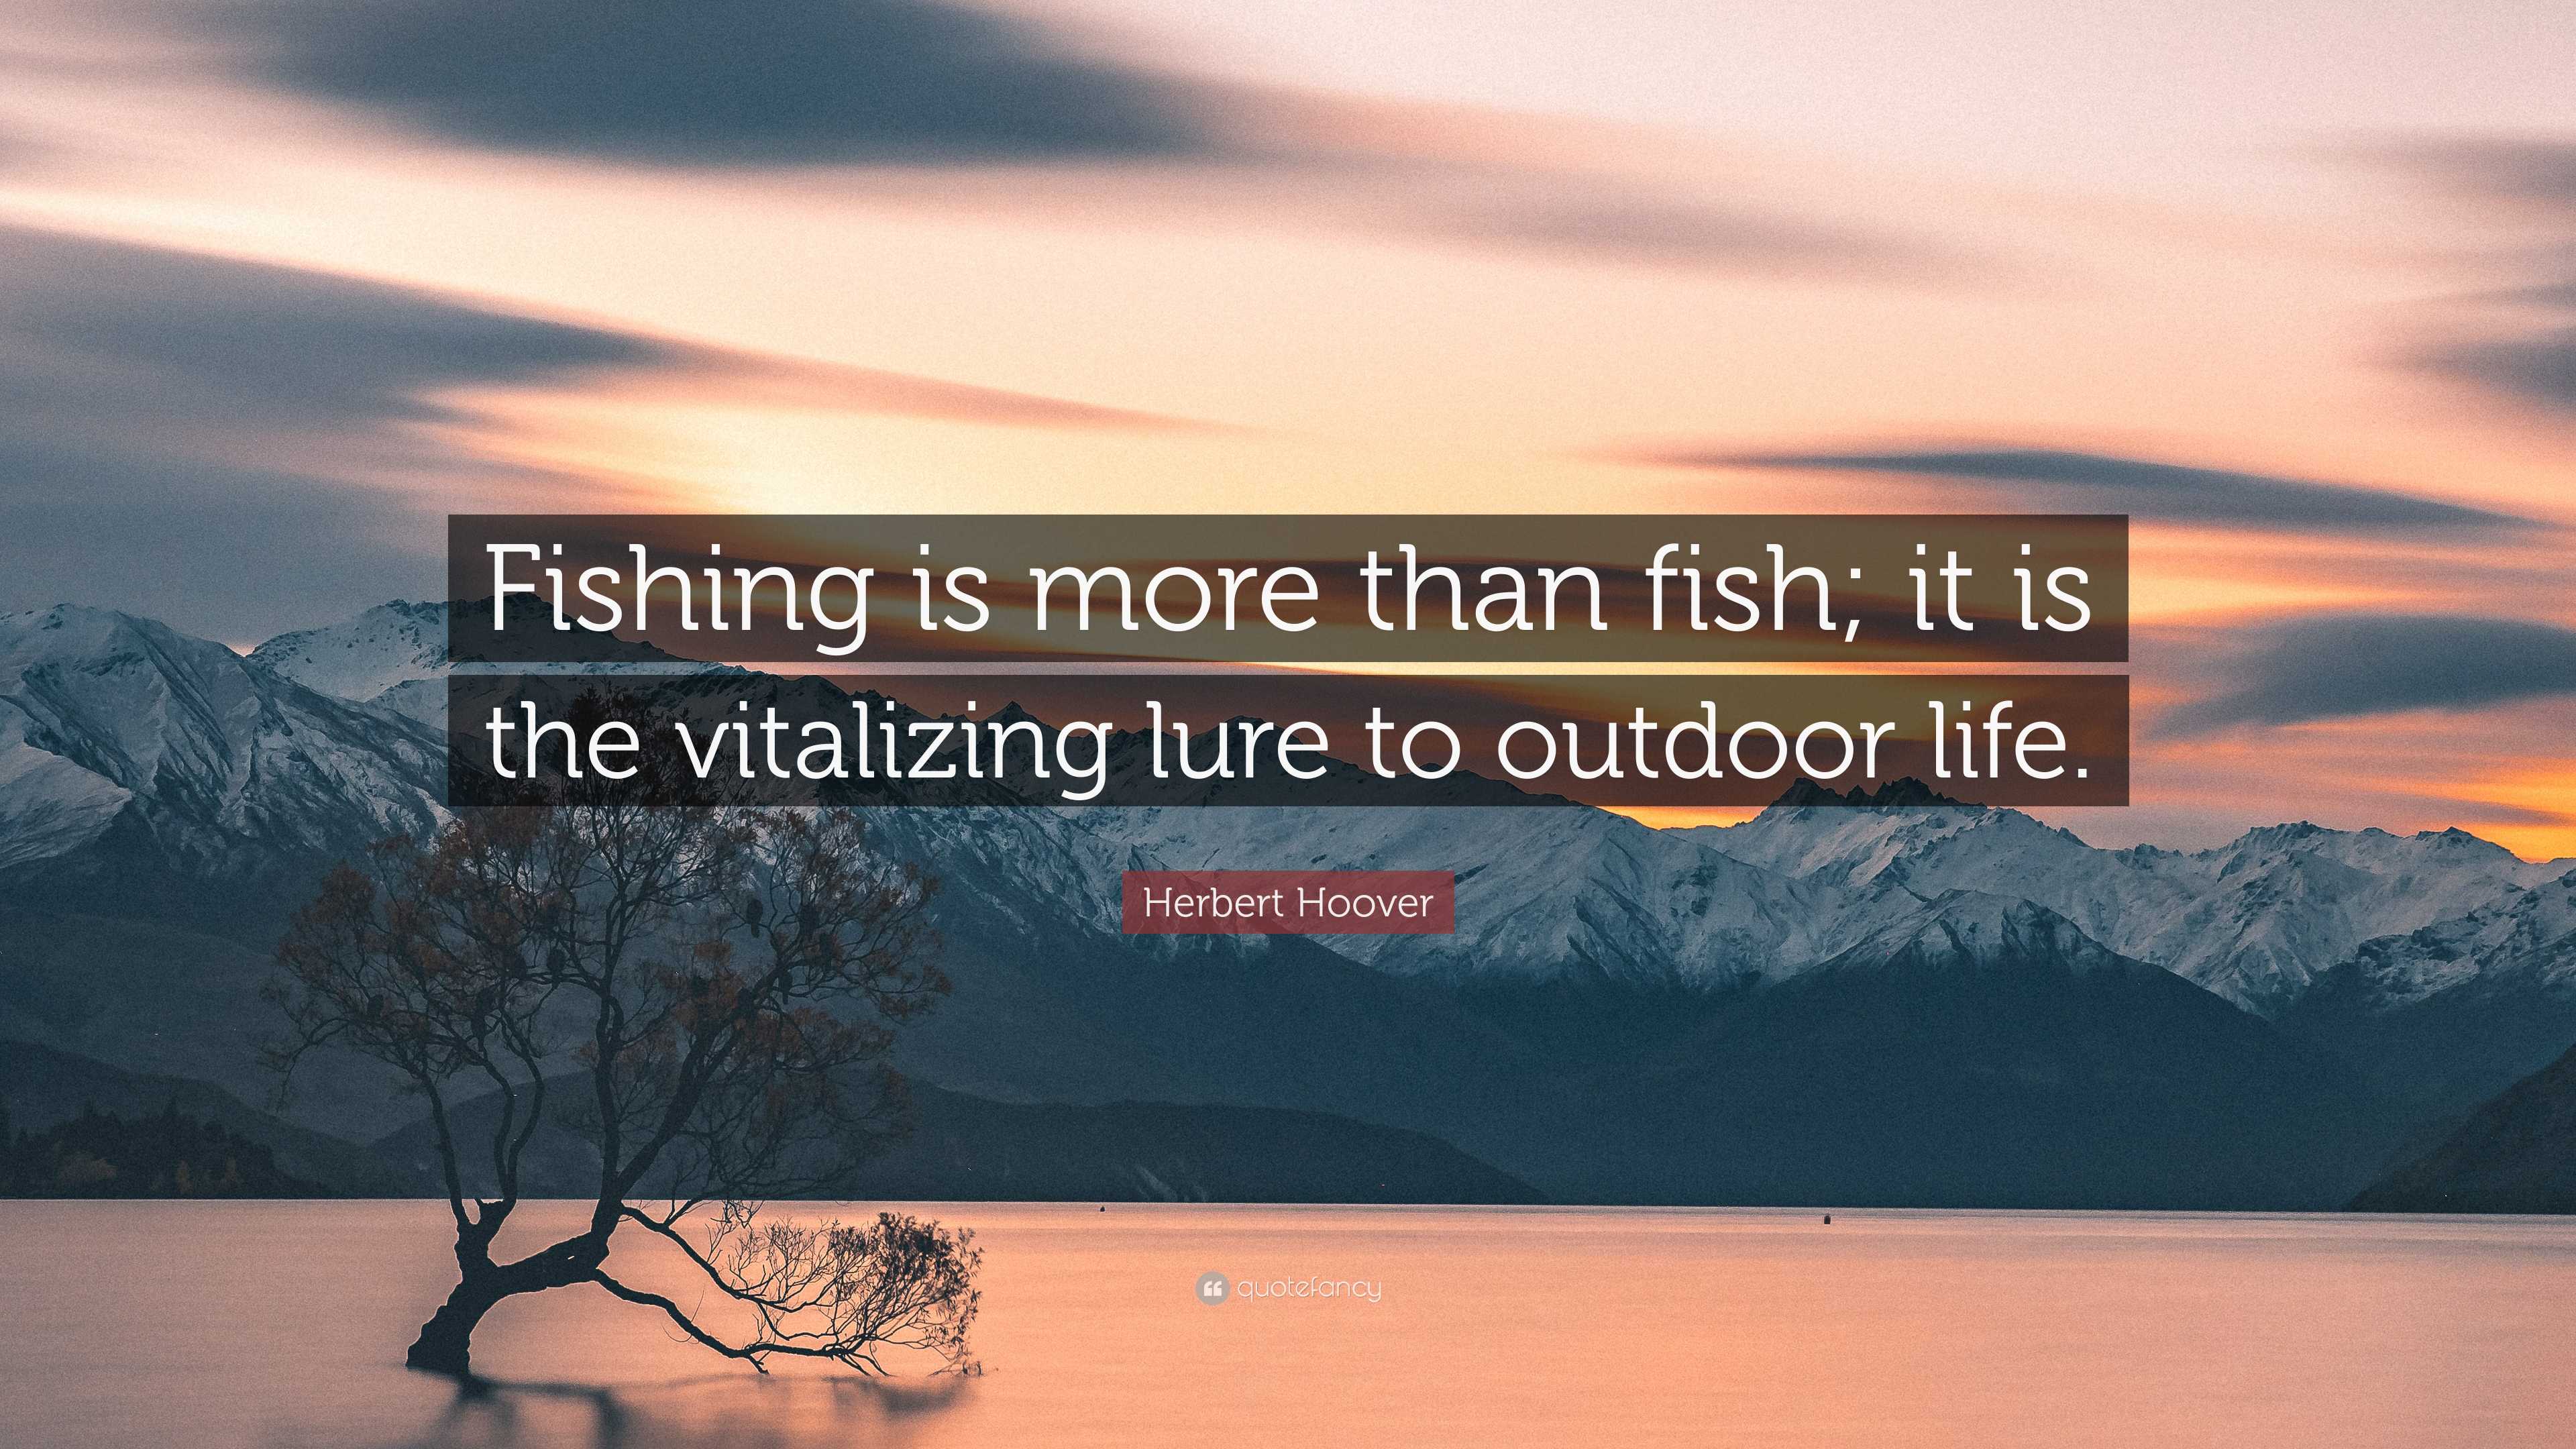 Top 100 Quotes About Lure: Famous Quotes & Sayings About Lure